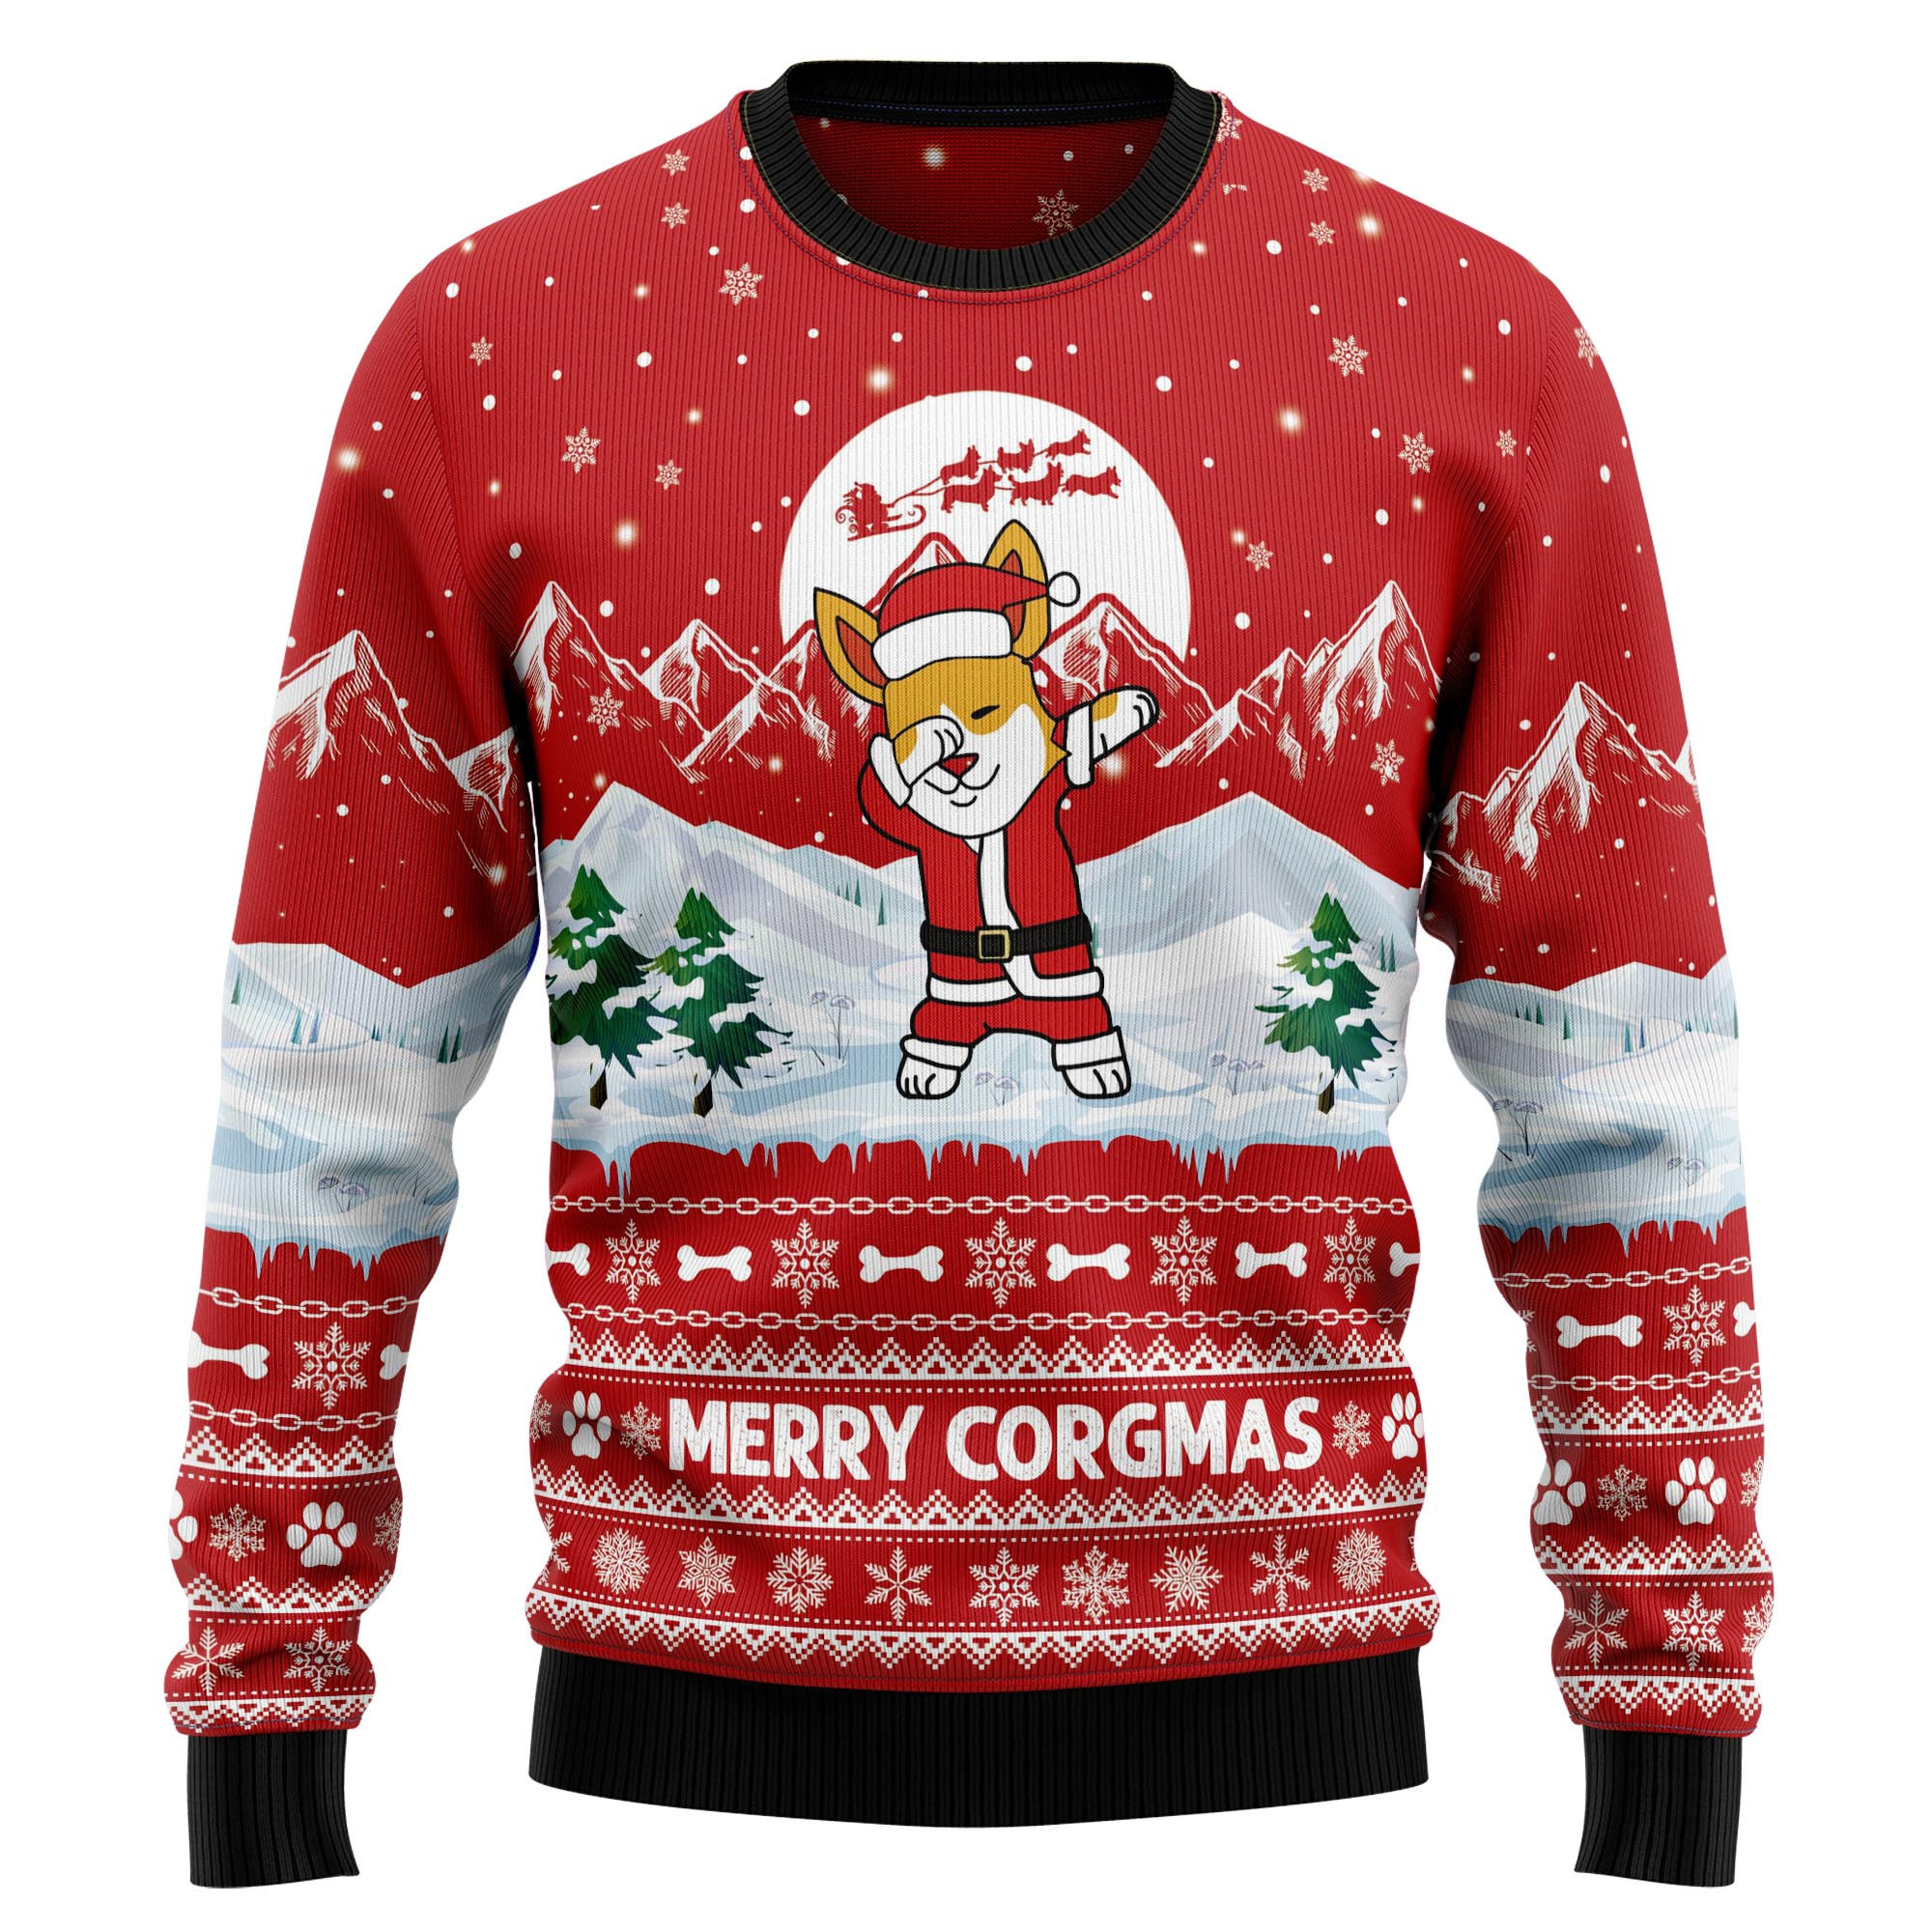 Corgi Merry Xmas Ugly Christmas Sweater, Ugly Sweater For Men Women, Holiday Sweater